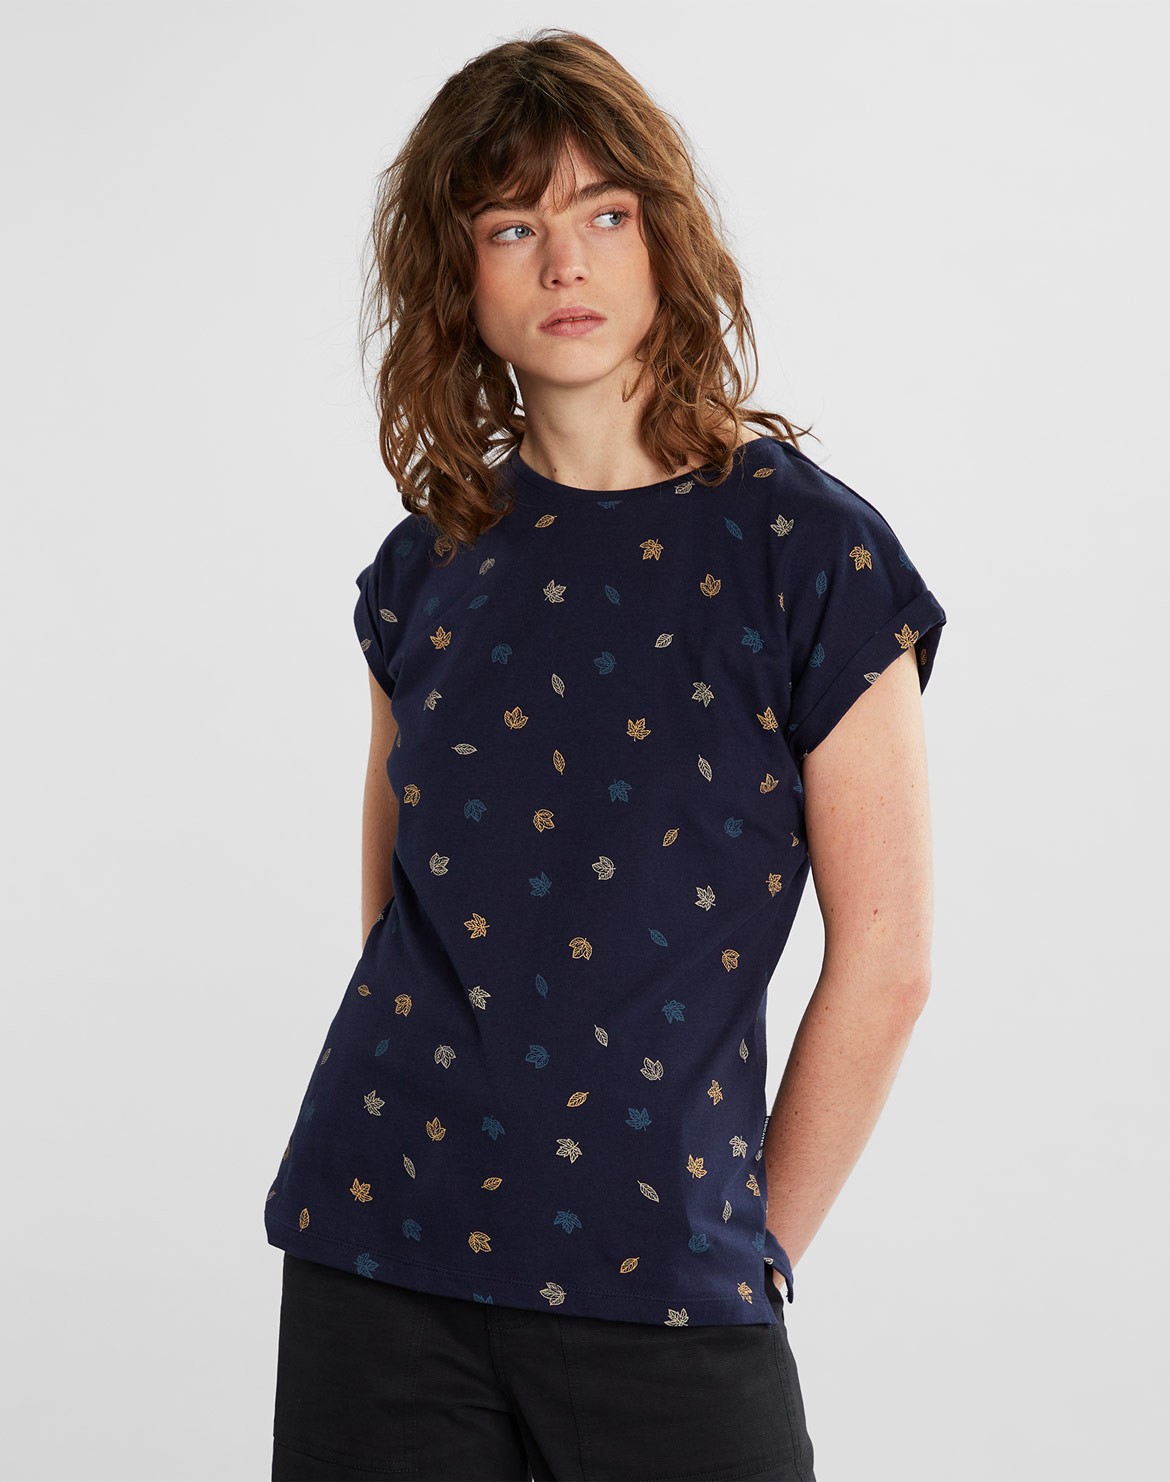 Visby Autumn Leaves T-Shirt